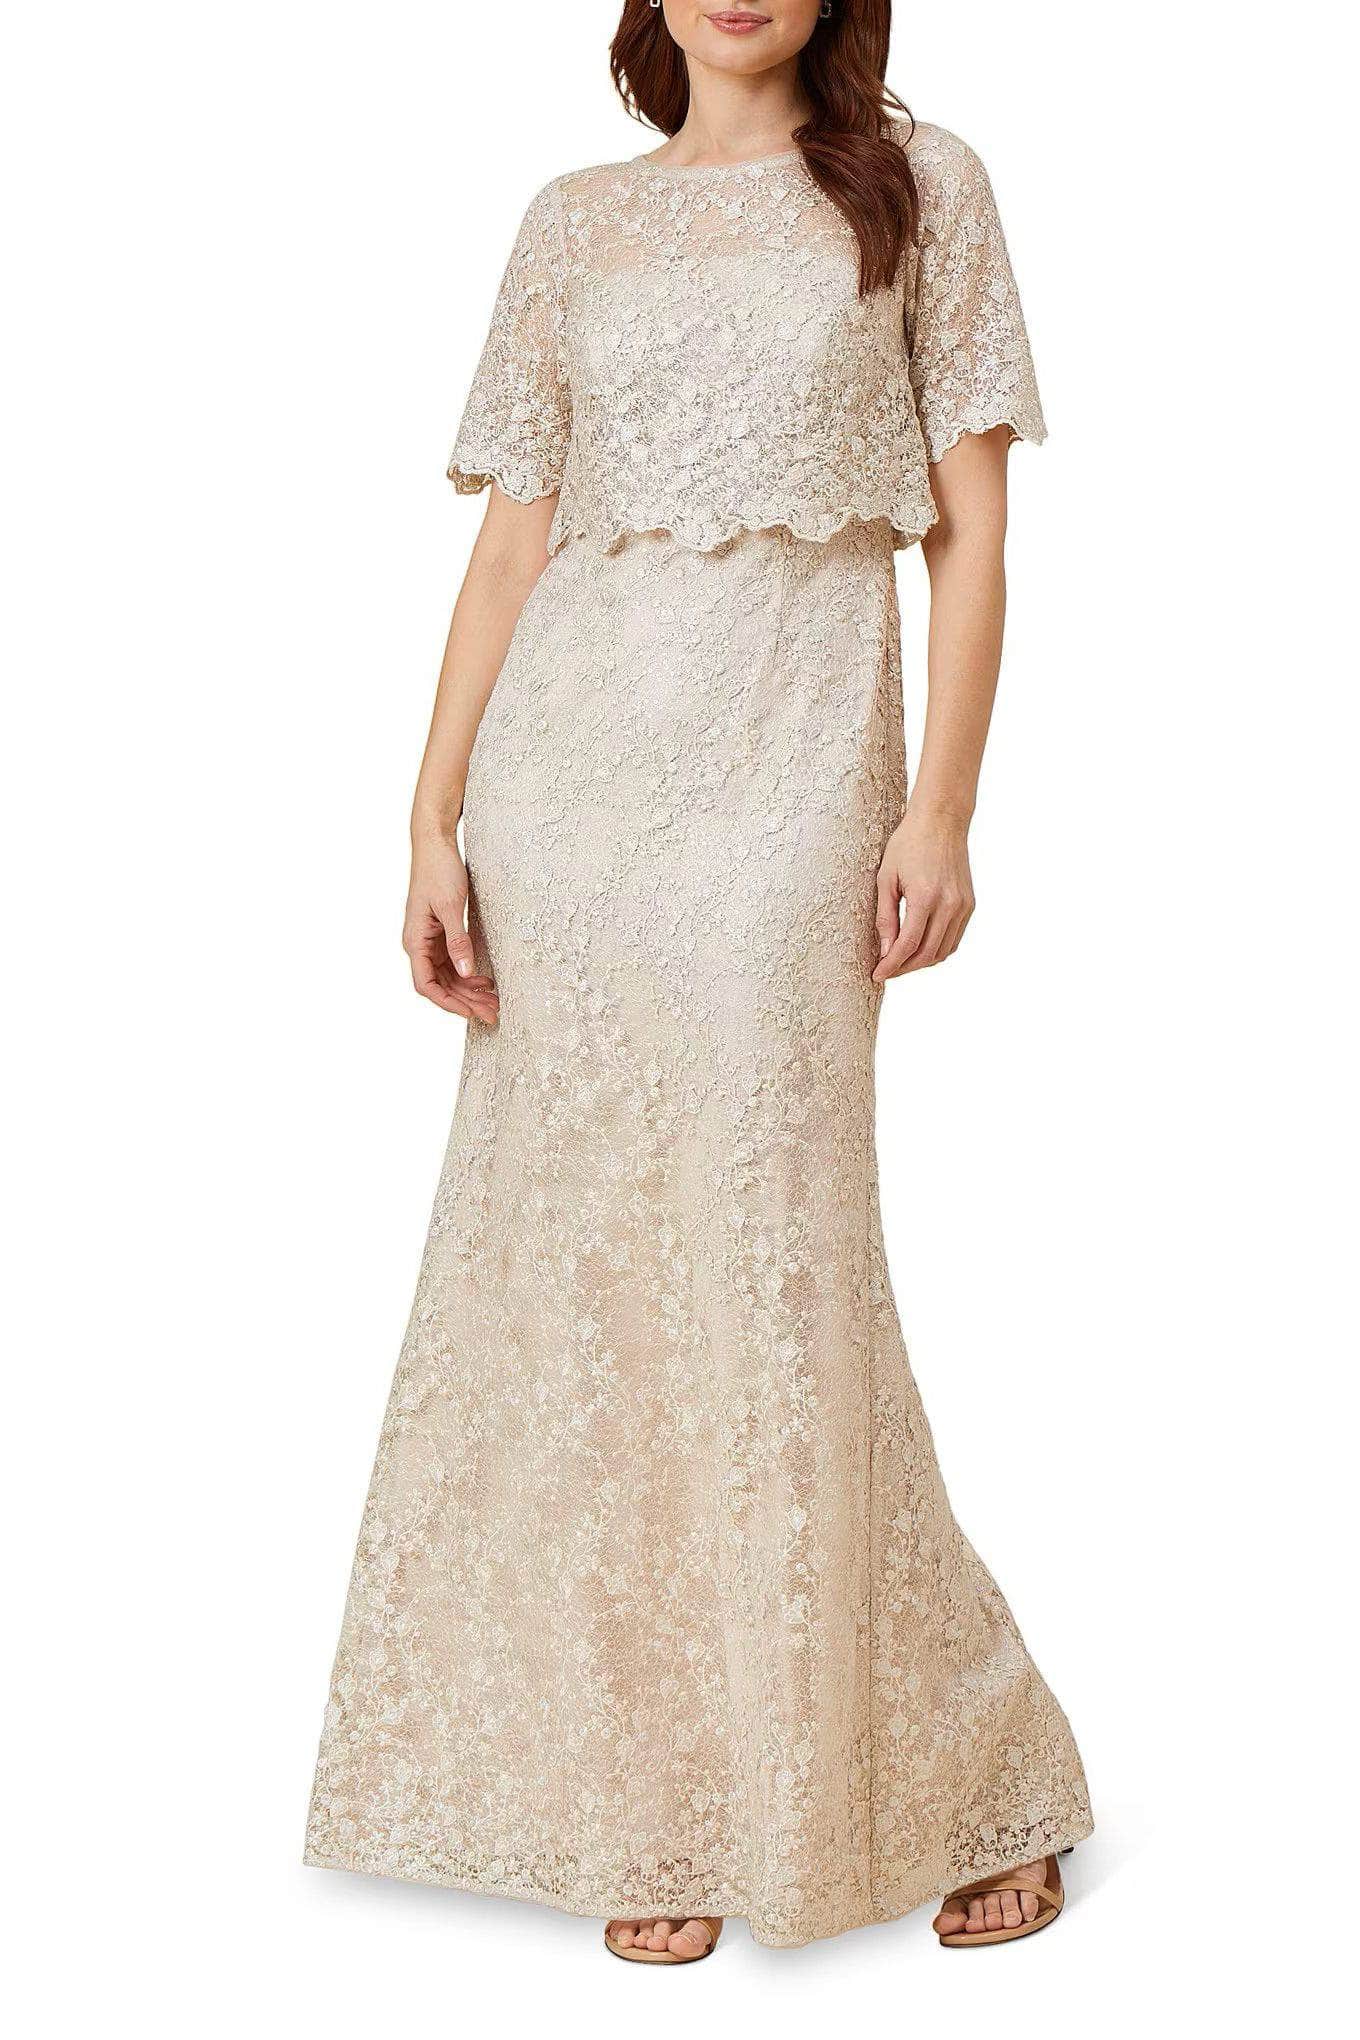 Image of Adrianna Papell AP1E210399 P - Floral Lace A-Line Formal Gown